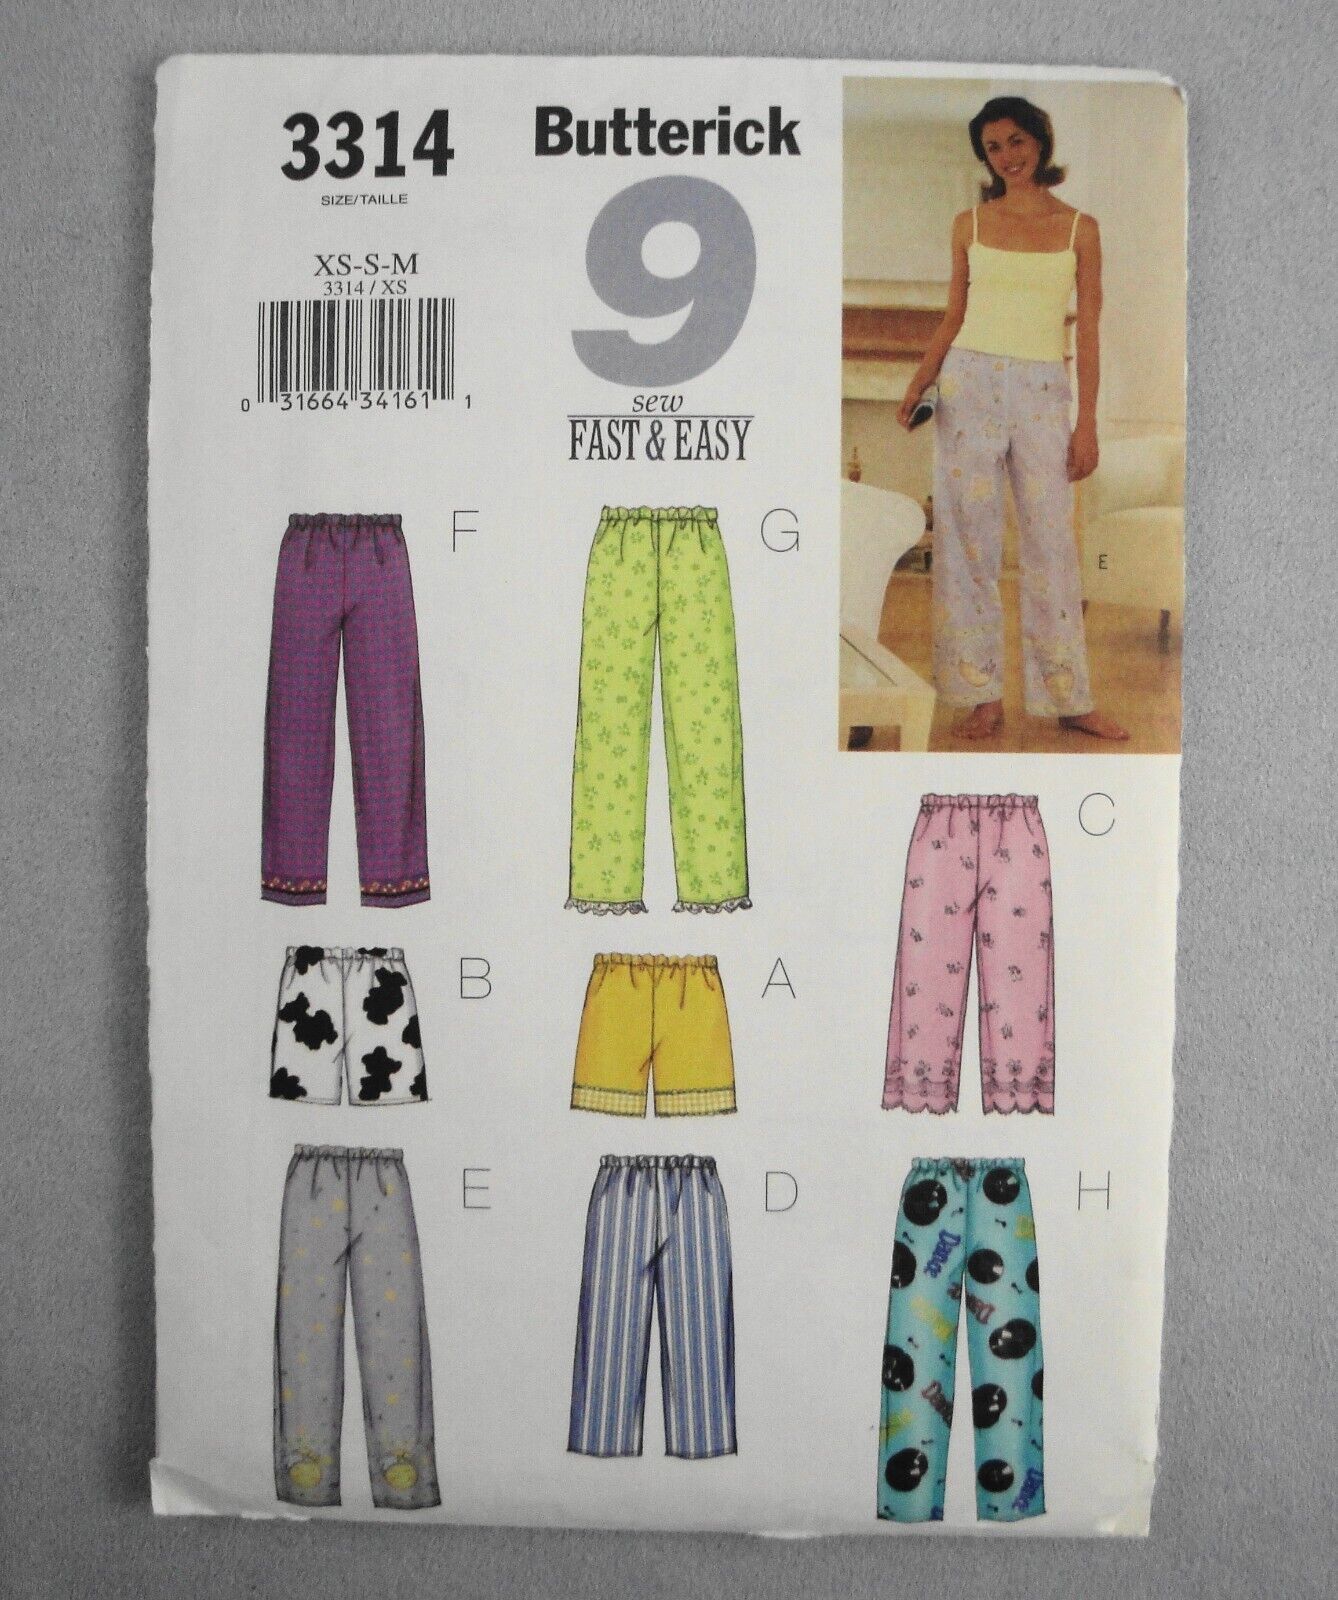 Primary image for Butterick Fast & Easy 3314 Lounge Pants Shorts Spaghetti Top Pajama XS, S, M